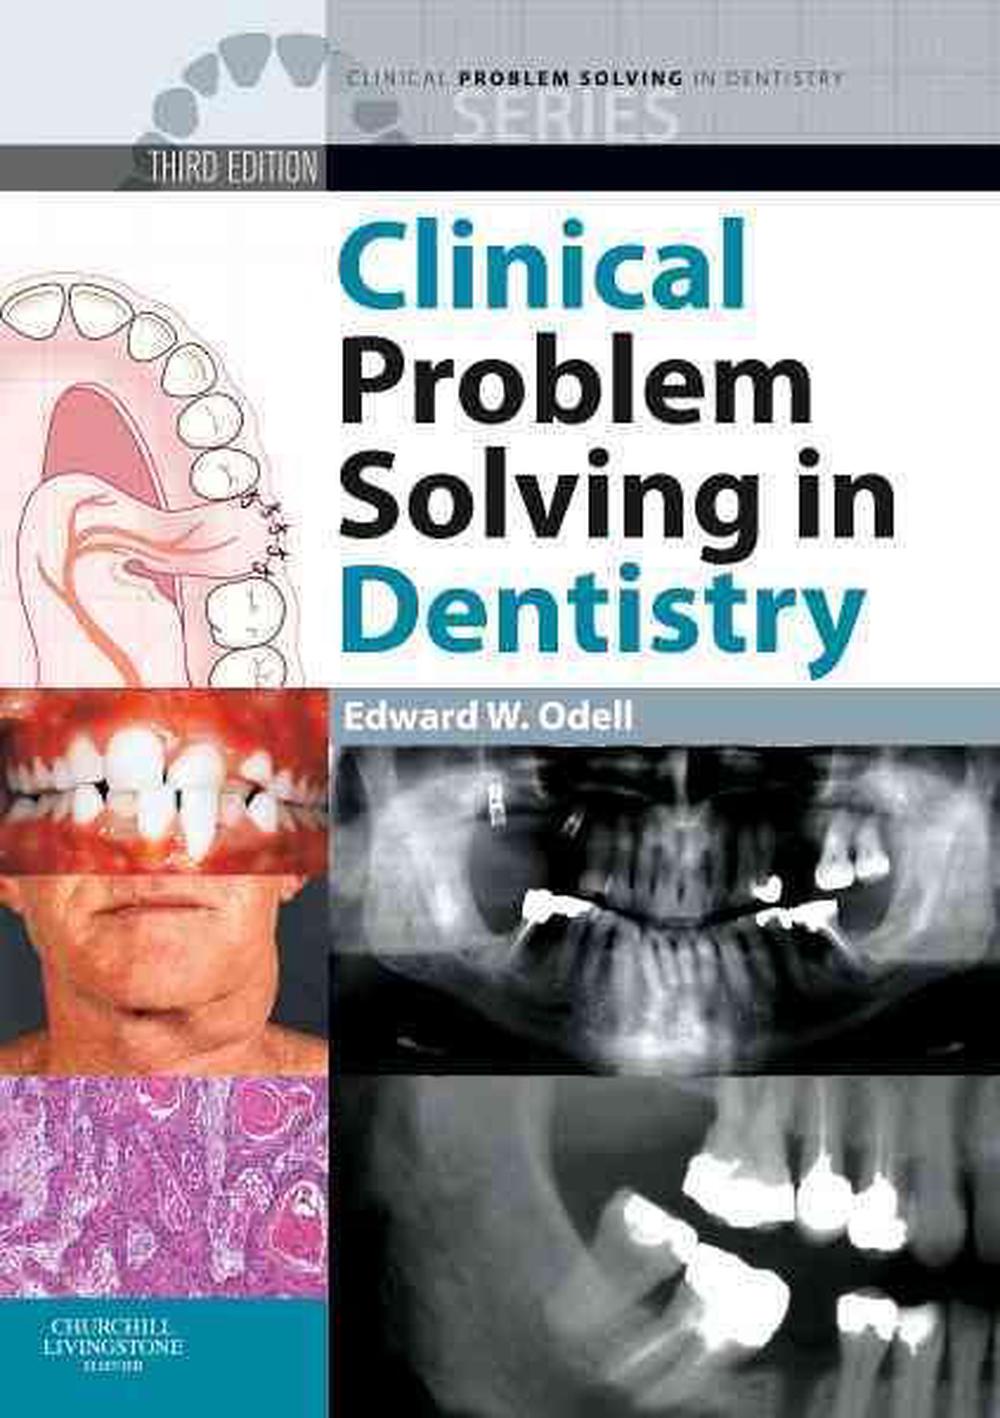 clinical problem solving in dentistry orthodontics and paediatric dentistry 3rd edition